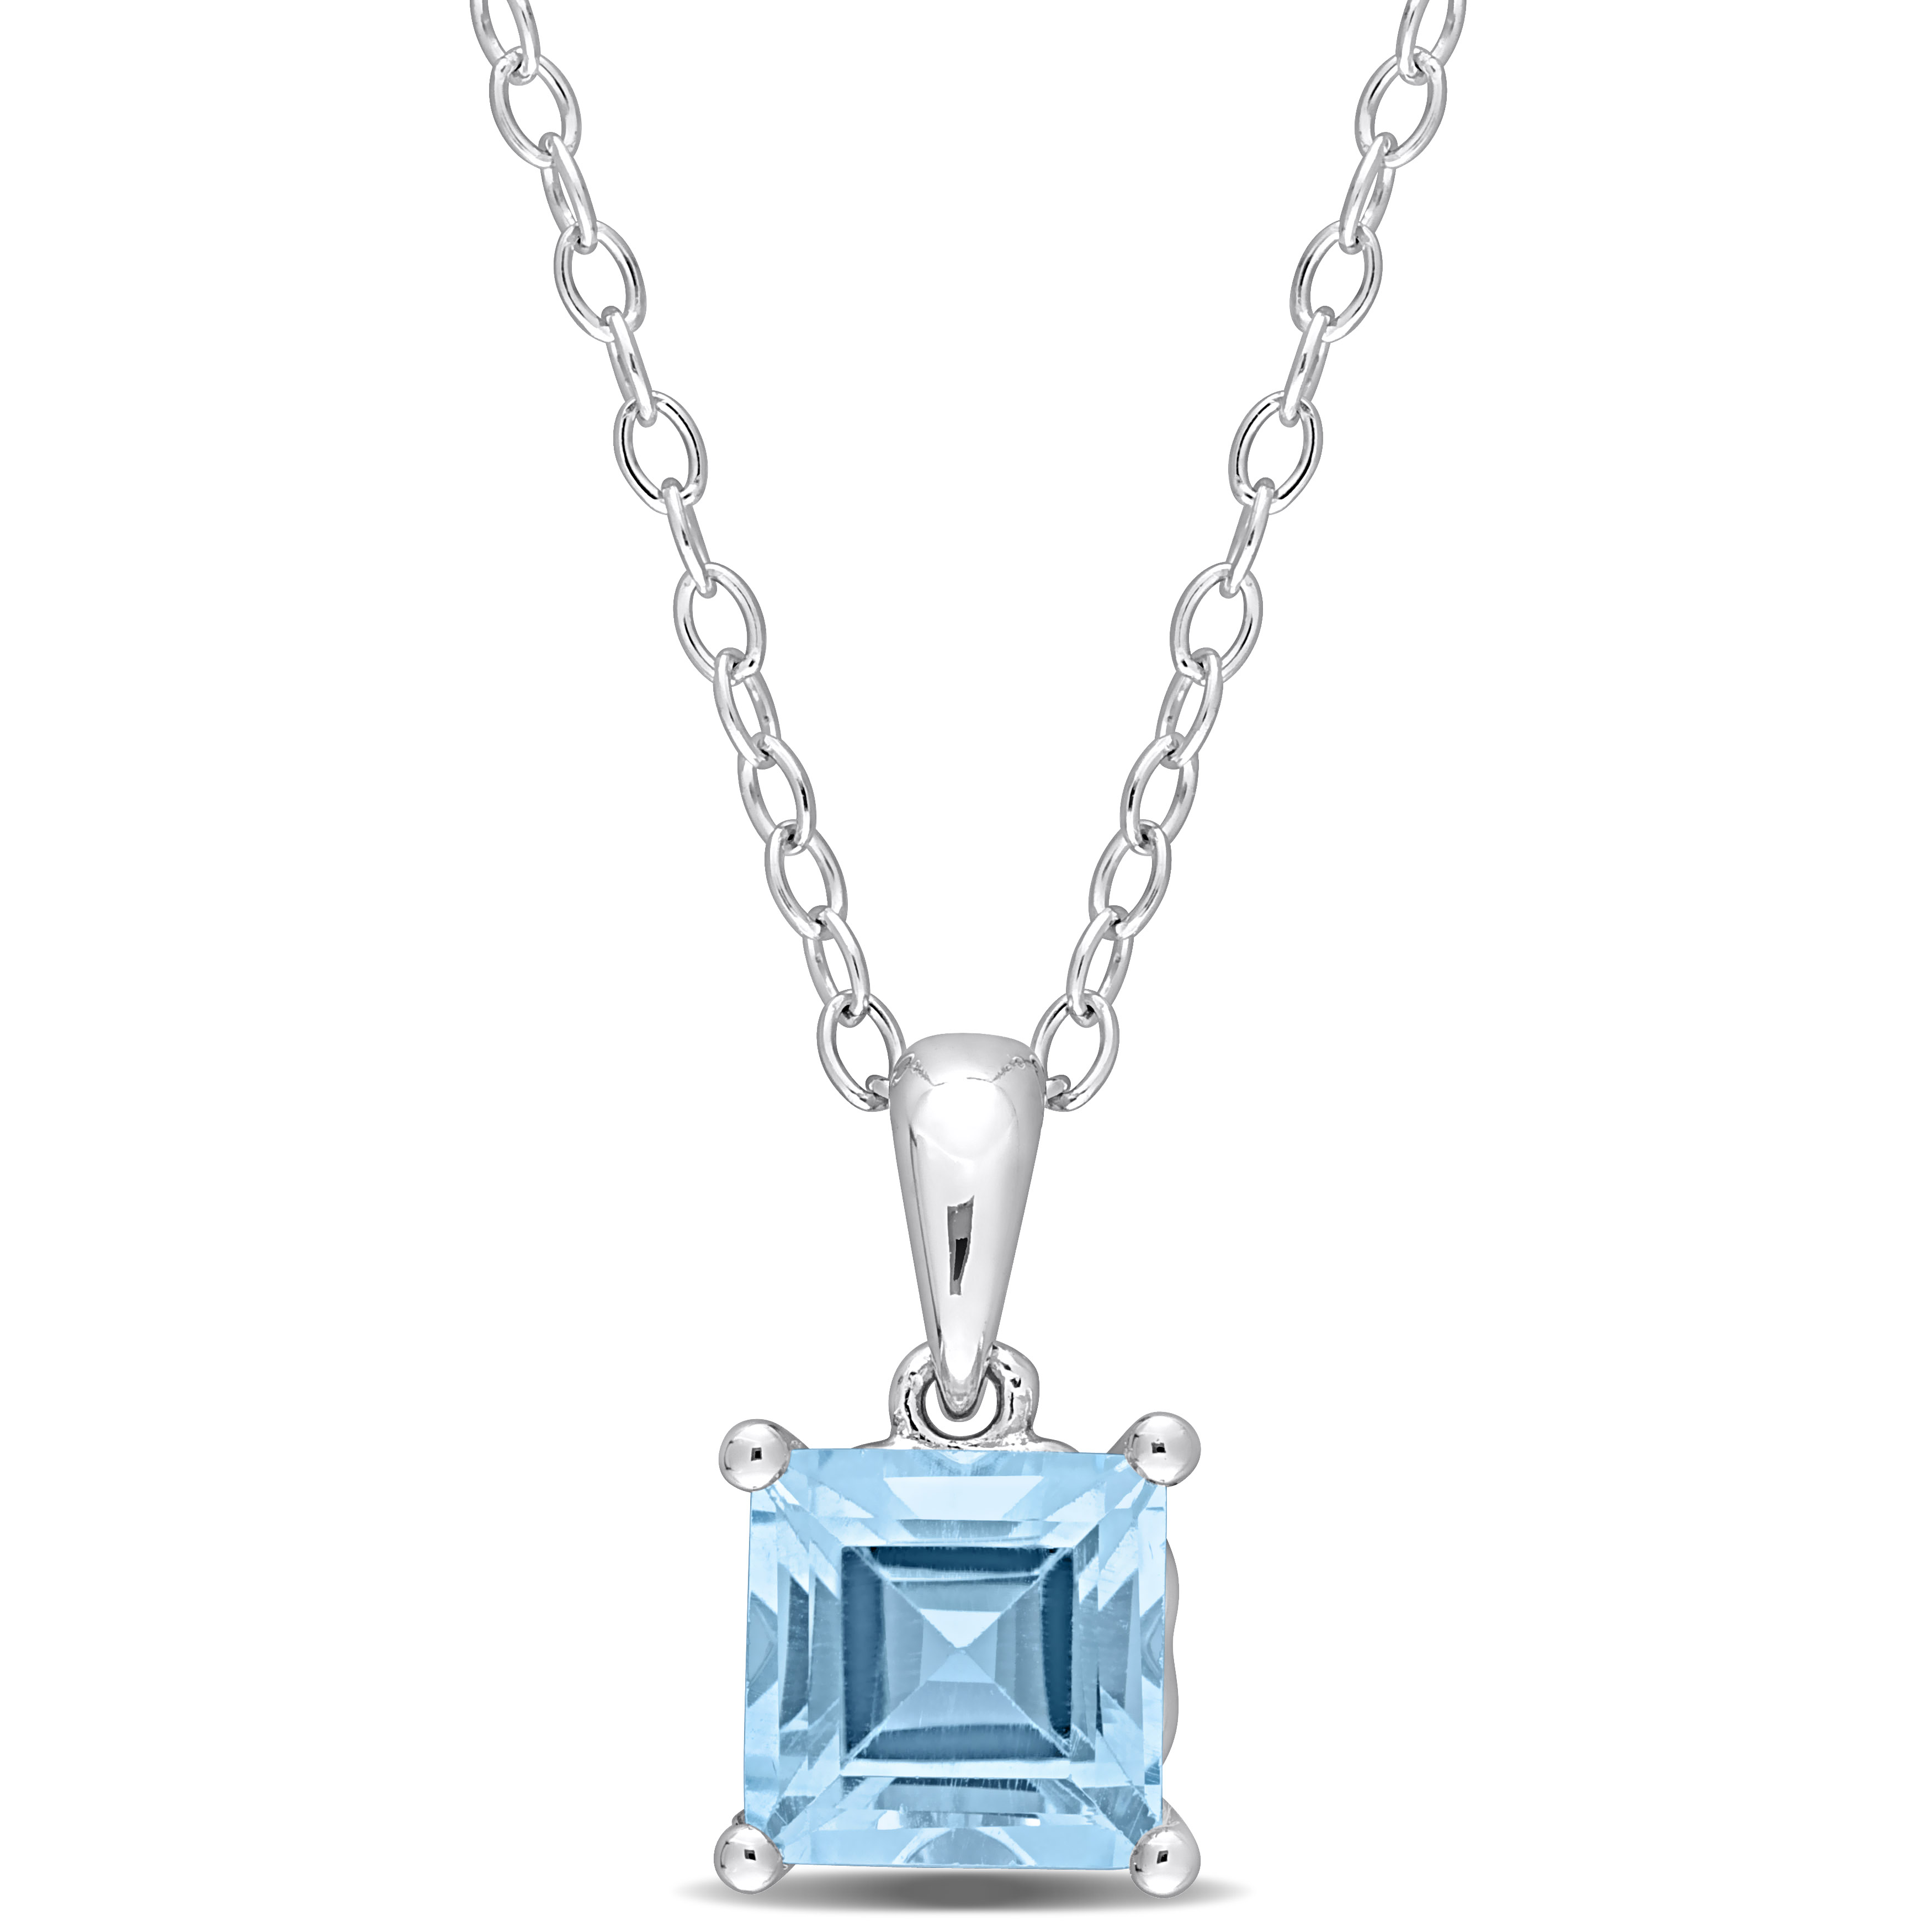 1 1/2 CT TGW Princess Cut Sky Blue Topaz Solitaire Heart Design Pendant with Chain in Sterling Silver - 18 in.